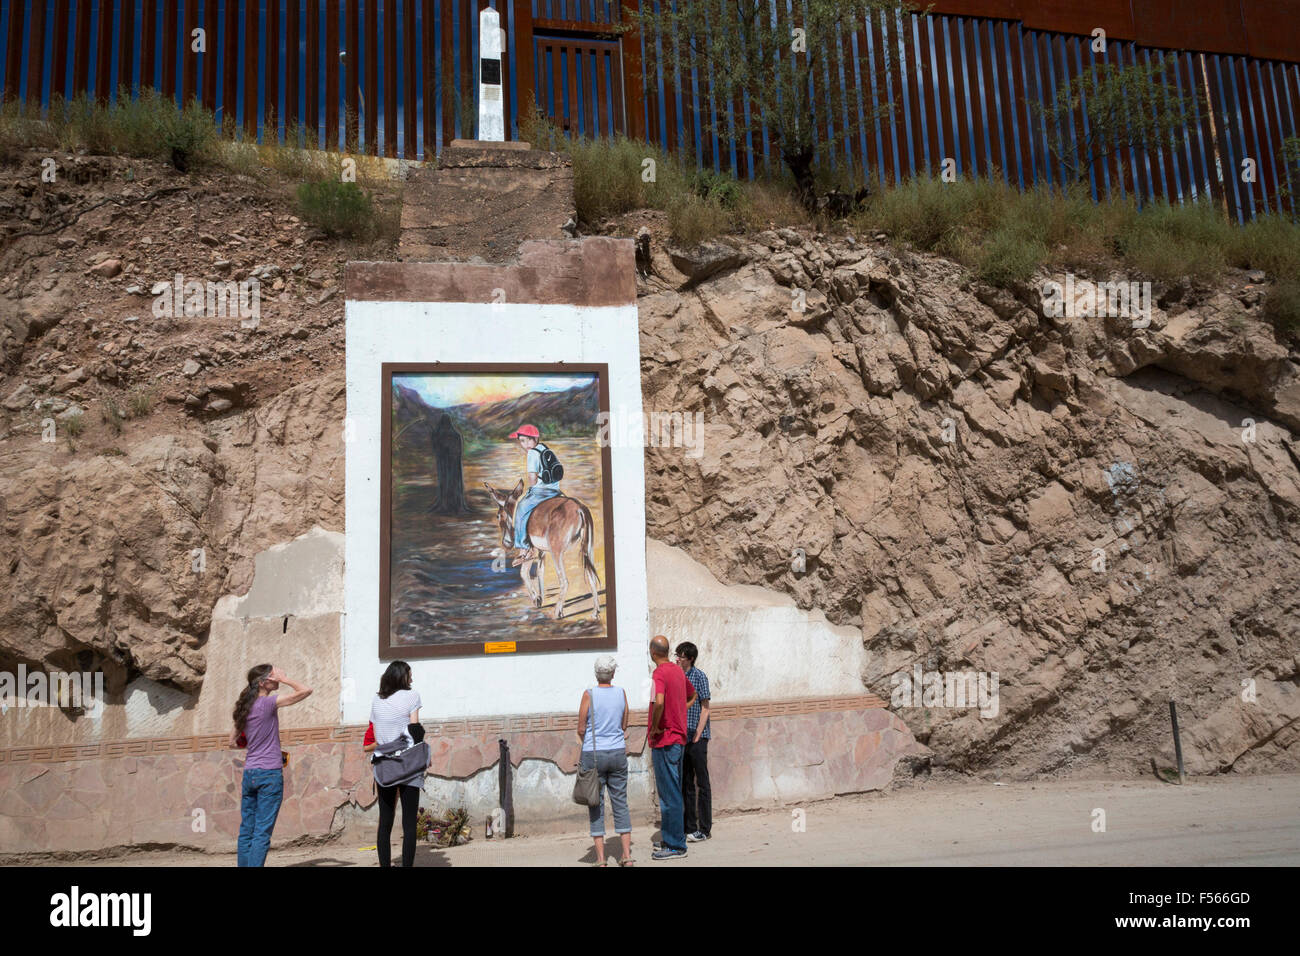 Nogales, Sonora Mexico - Tourists view a painting below the border fence separating the United States and Mexico. Stock Photo